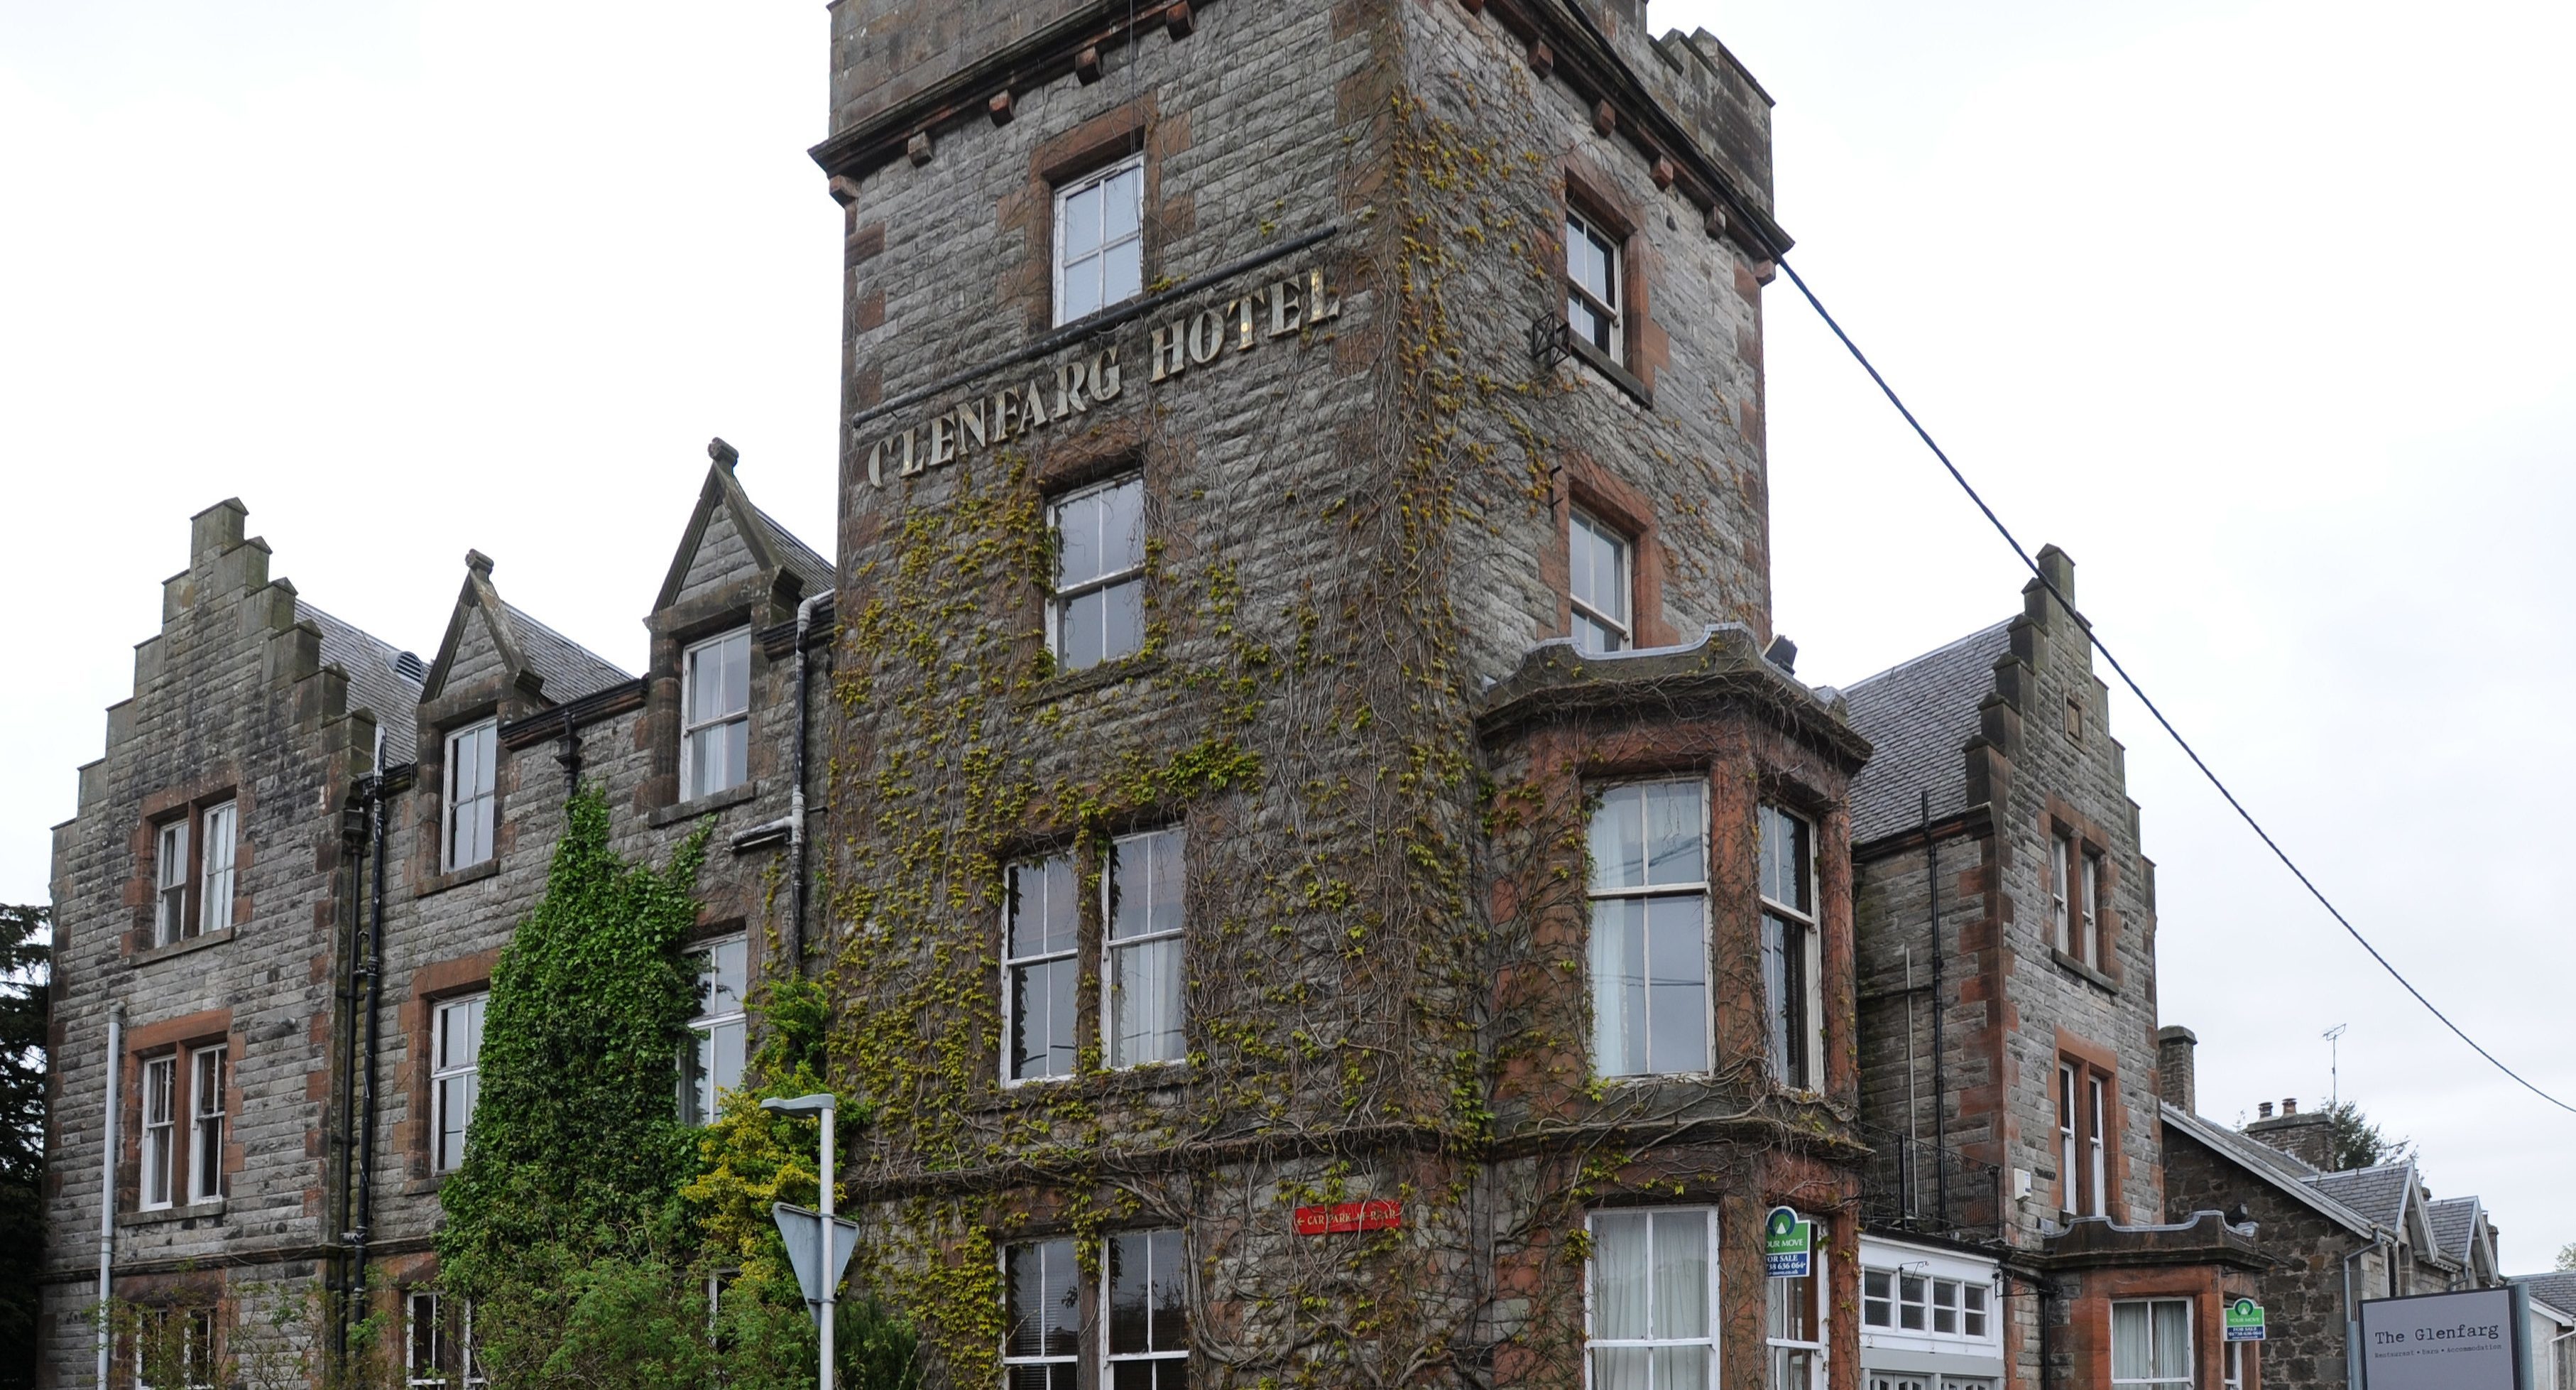 Enraged Glenfarg villagers are taking the council to court over hotel decision.